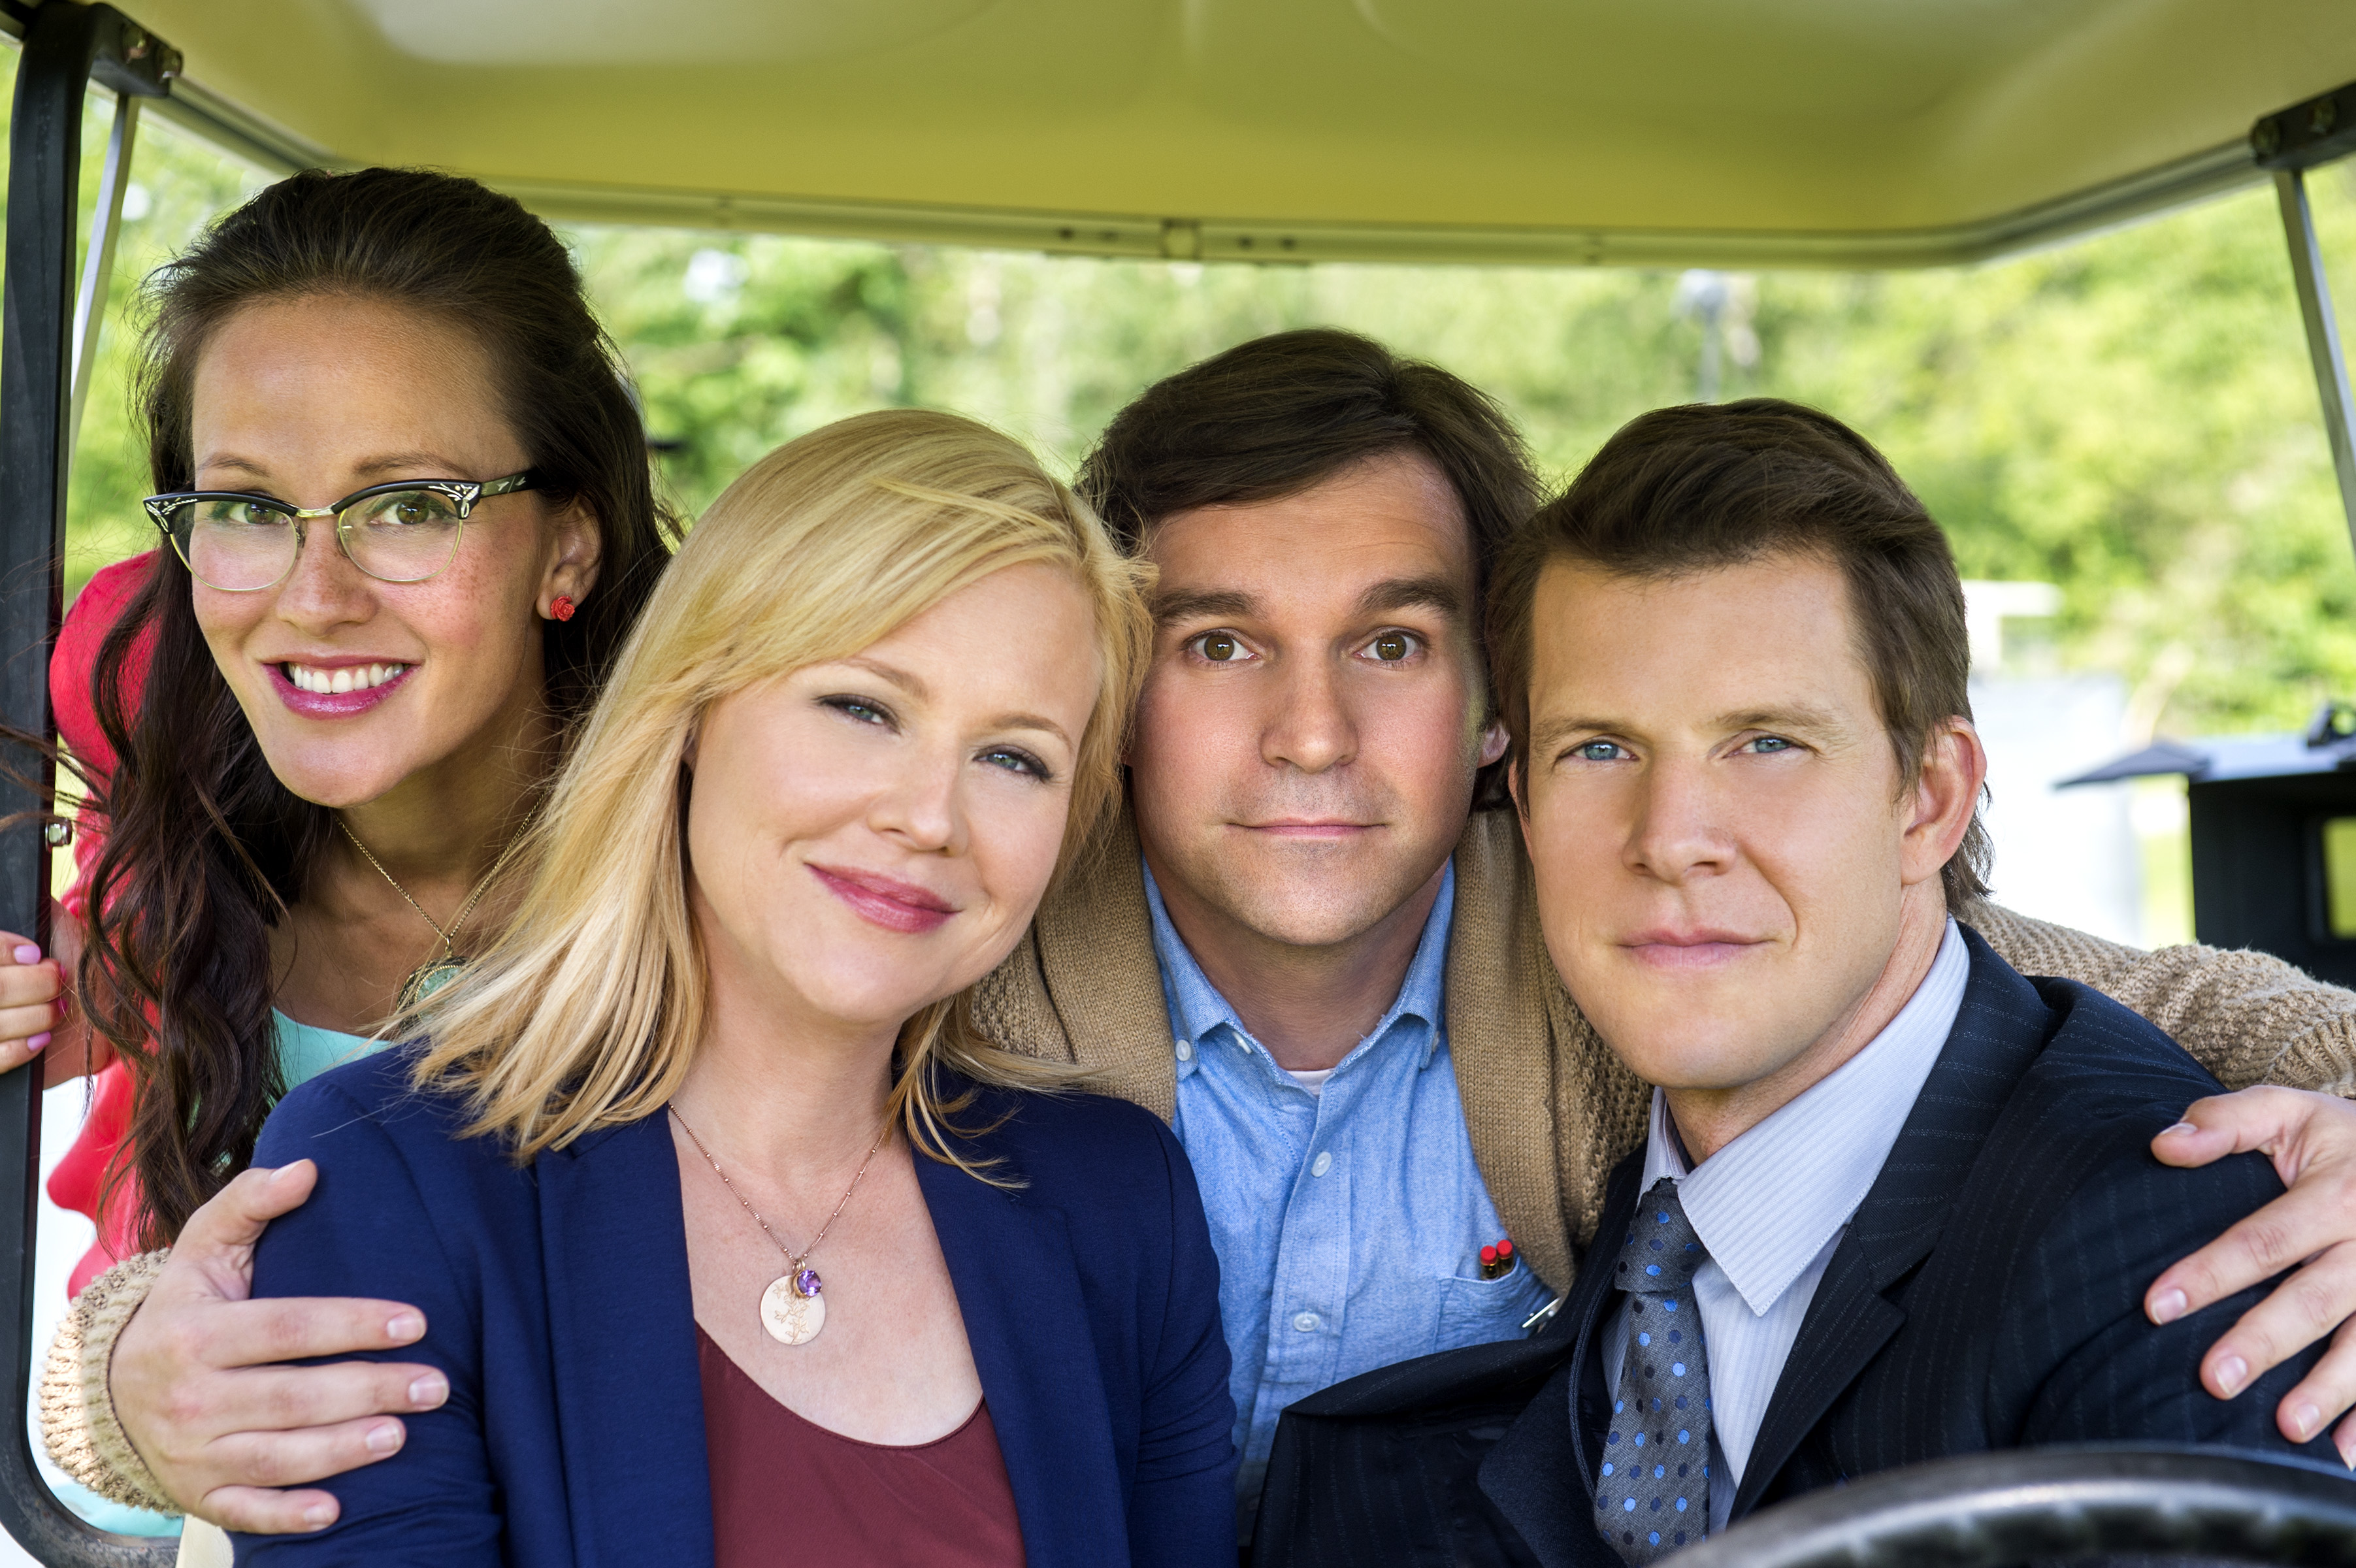 Crystal Lowe as Rita Haywith, Geoff Gustafson as Norman Dorman, Eric Mabius as Oliver O'Toole and Kristin Booth as Shane McInerney in Signed, Sealed, Delivered (2013)